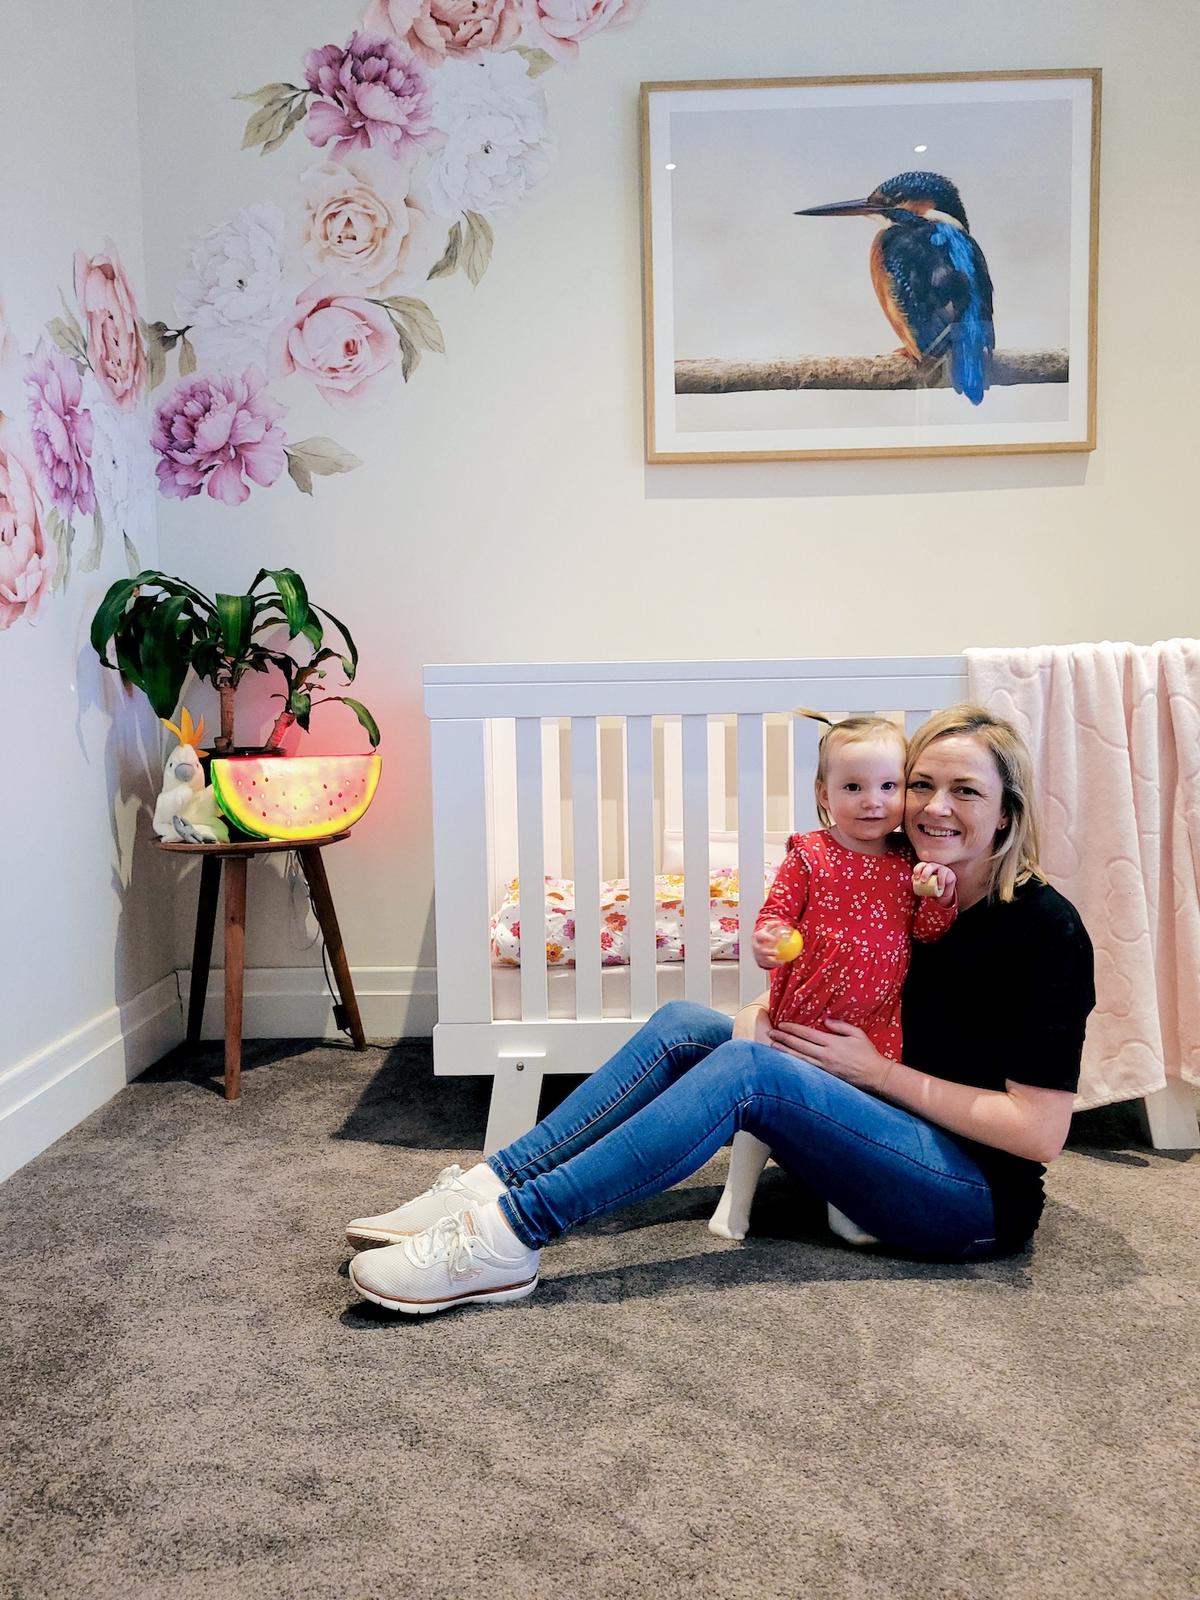 Natalee with her daughter Ebony next to the watermelon night light. (Courtesy of <a href="https://www.facebook.com/natalee.alway">Natalee Leach</a>)